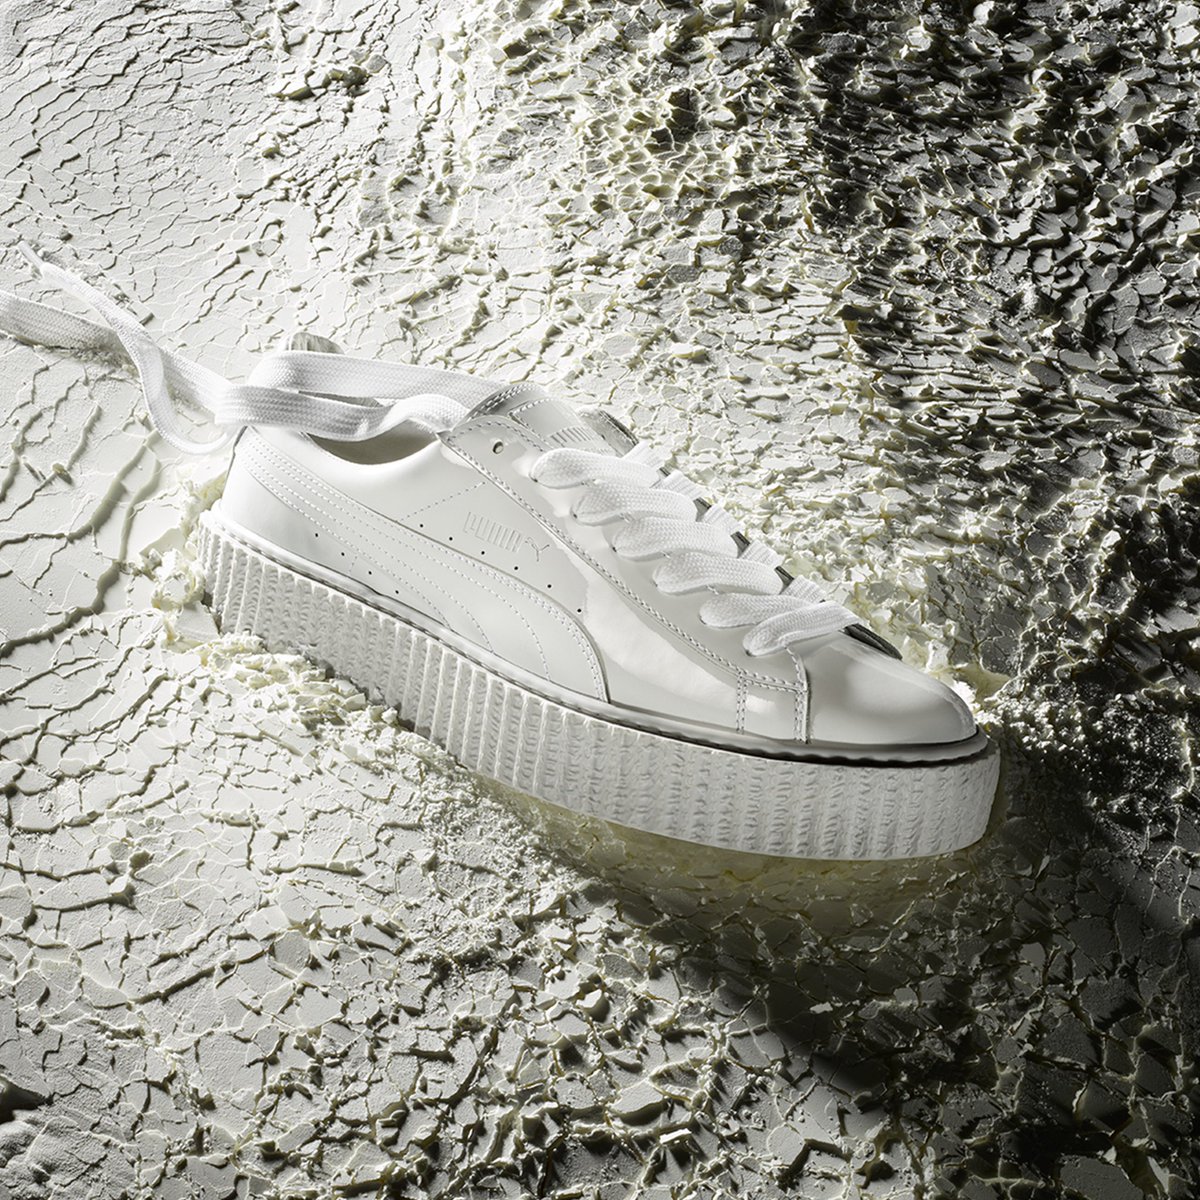 New colors of the @PUMA Creeper are out now!  https://t.co/GAkFFgYA0O https://t.co/NctLsqMlvE